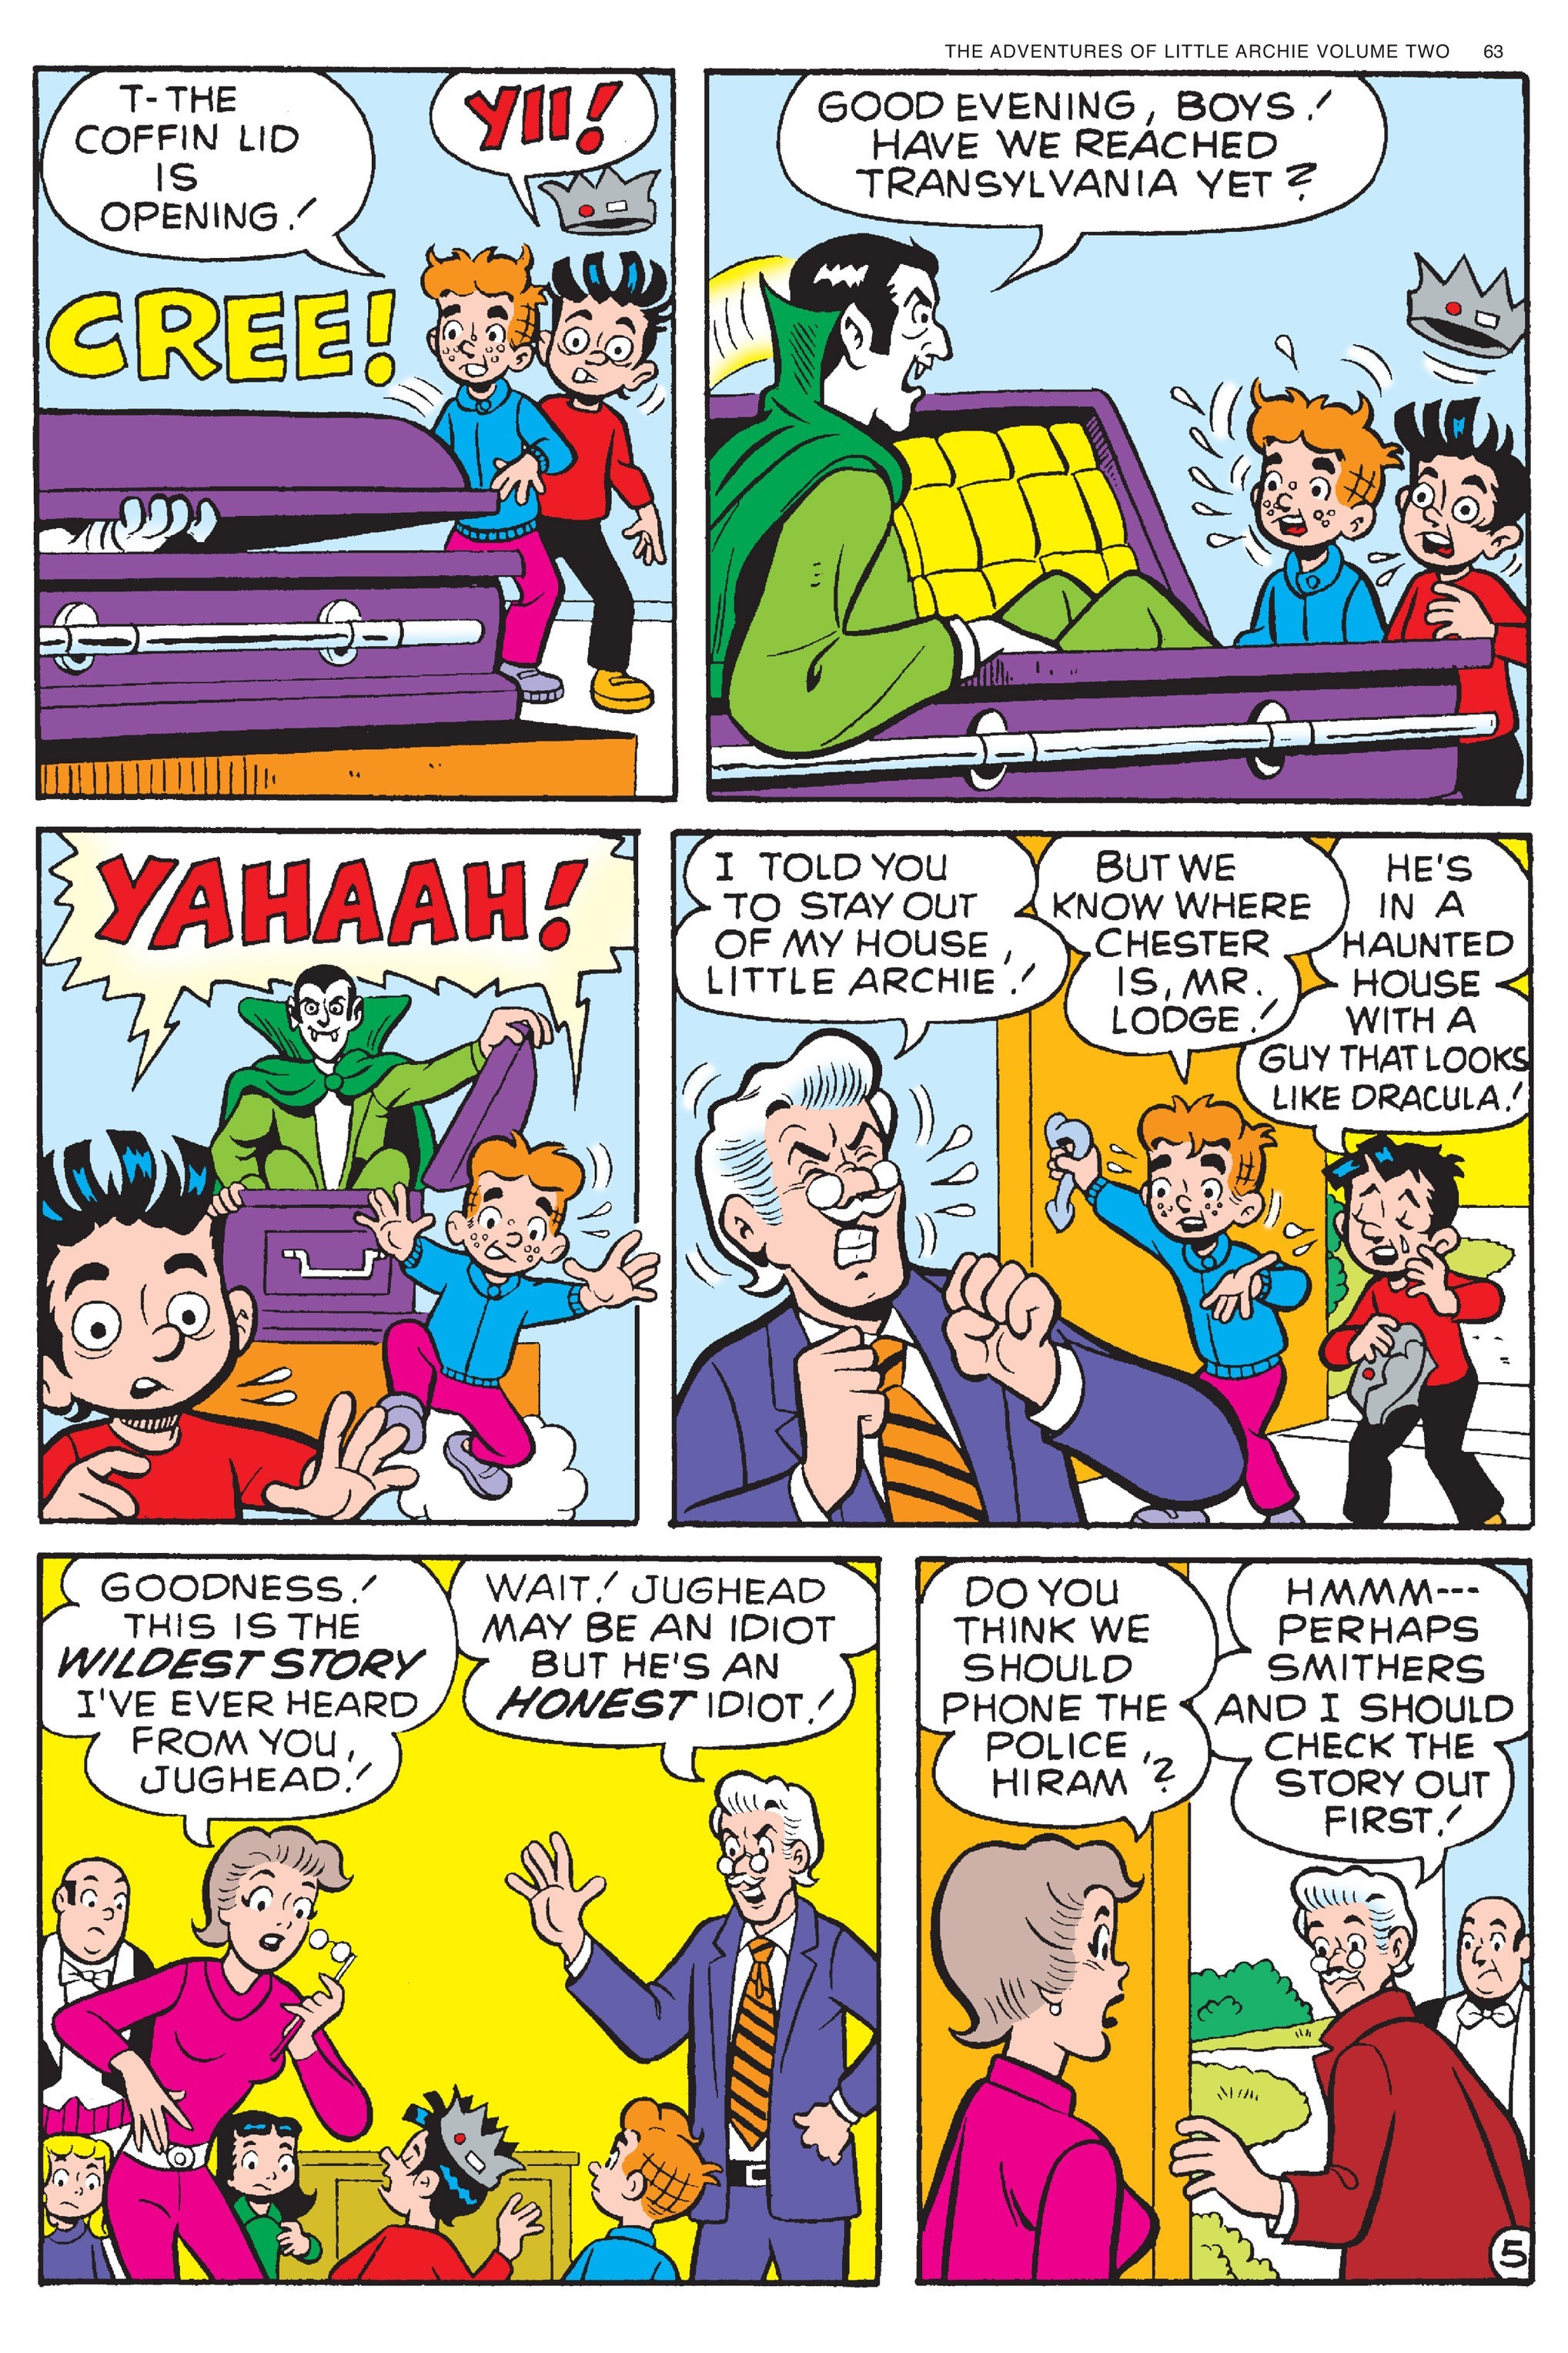 Read online Adventures of Little Archie comic -  Issue # TPB 2 - 64